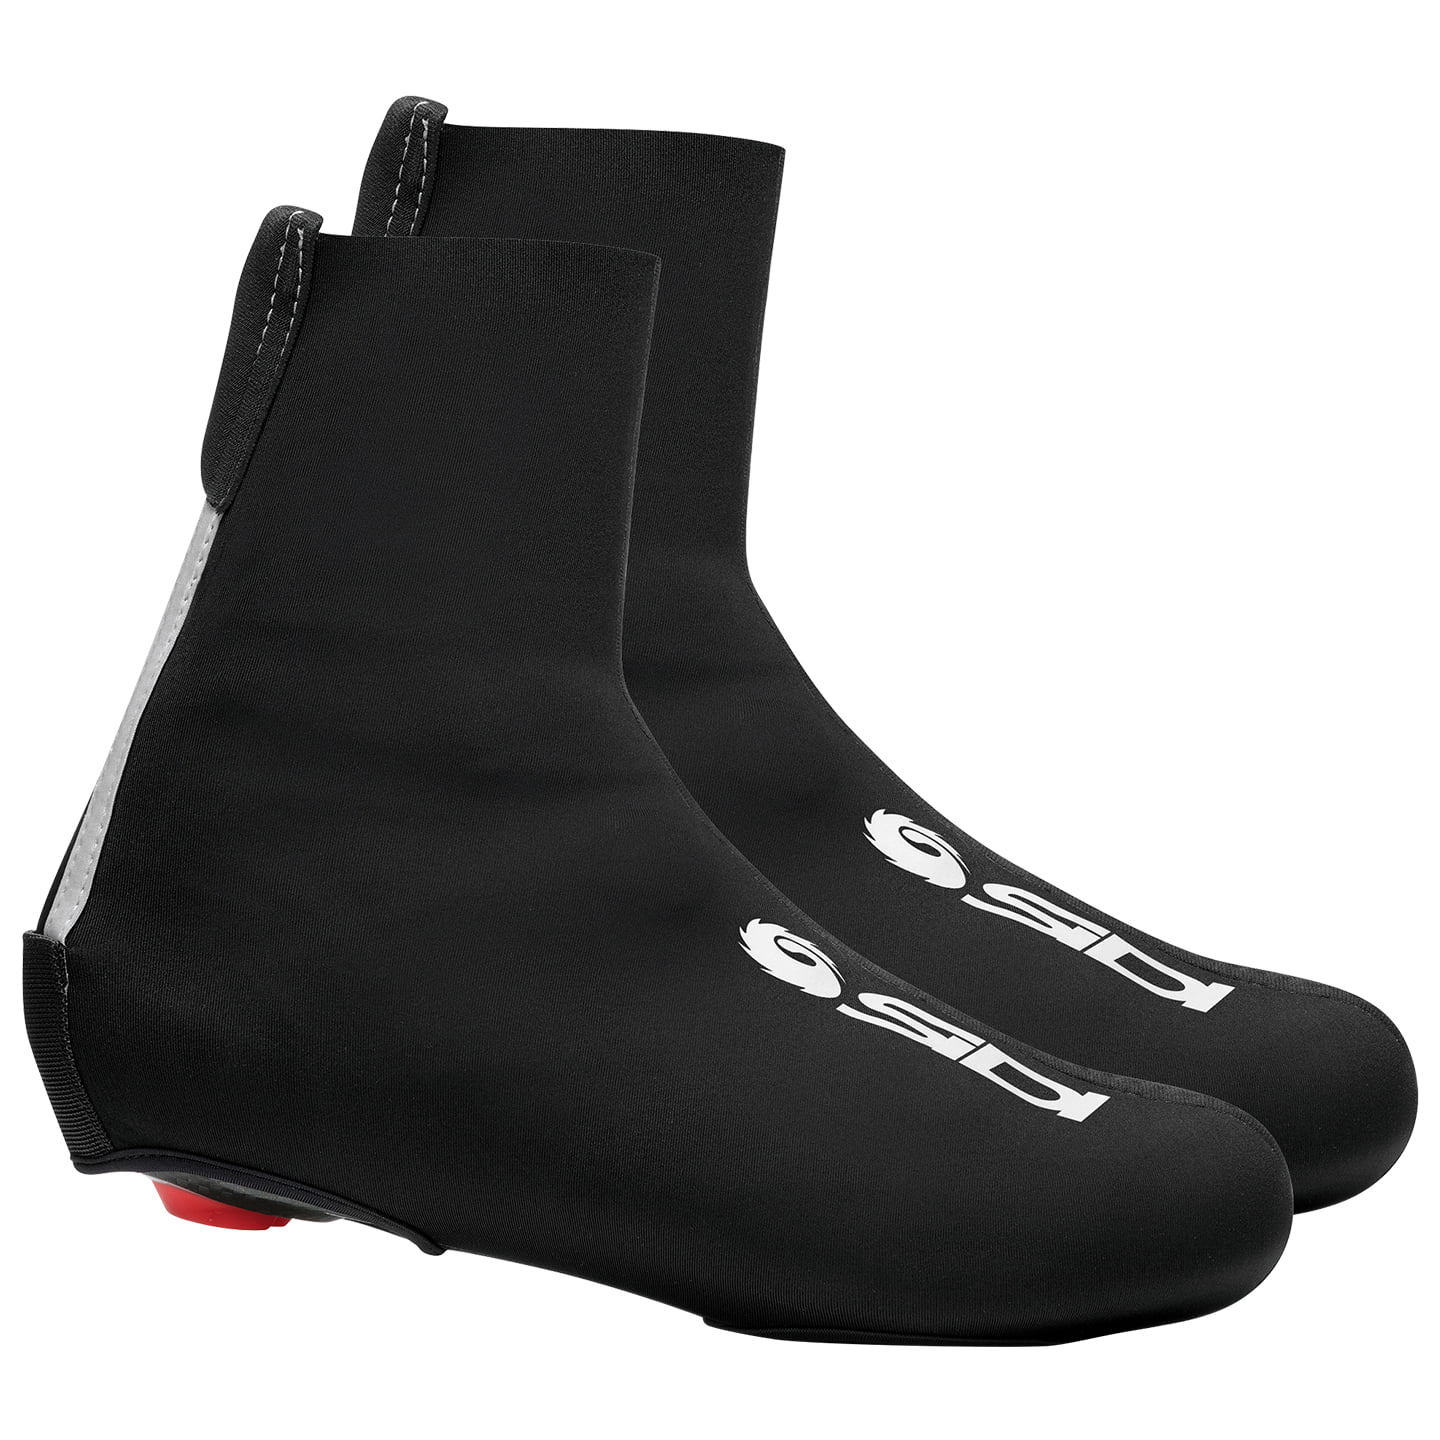 Road Frio Thermal Shoe Covers, Unisex (women / men), size XL, Cycling clothing